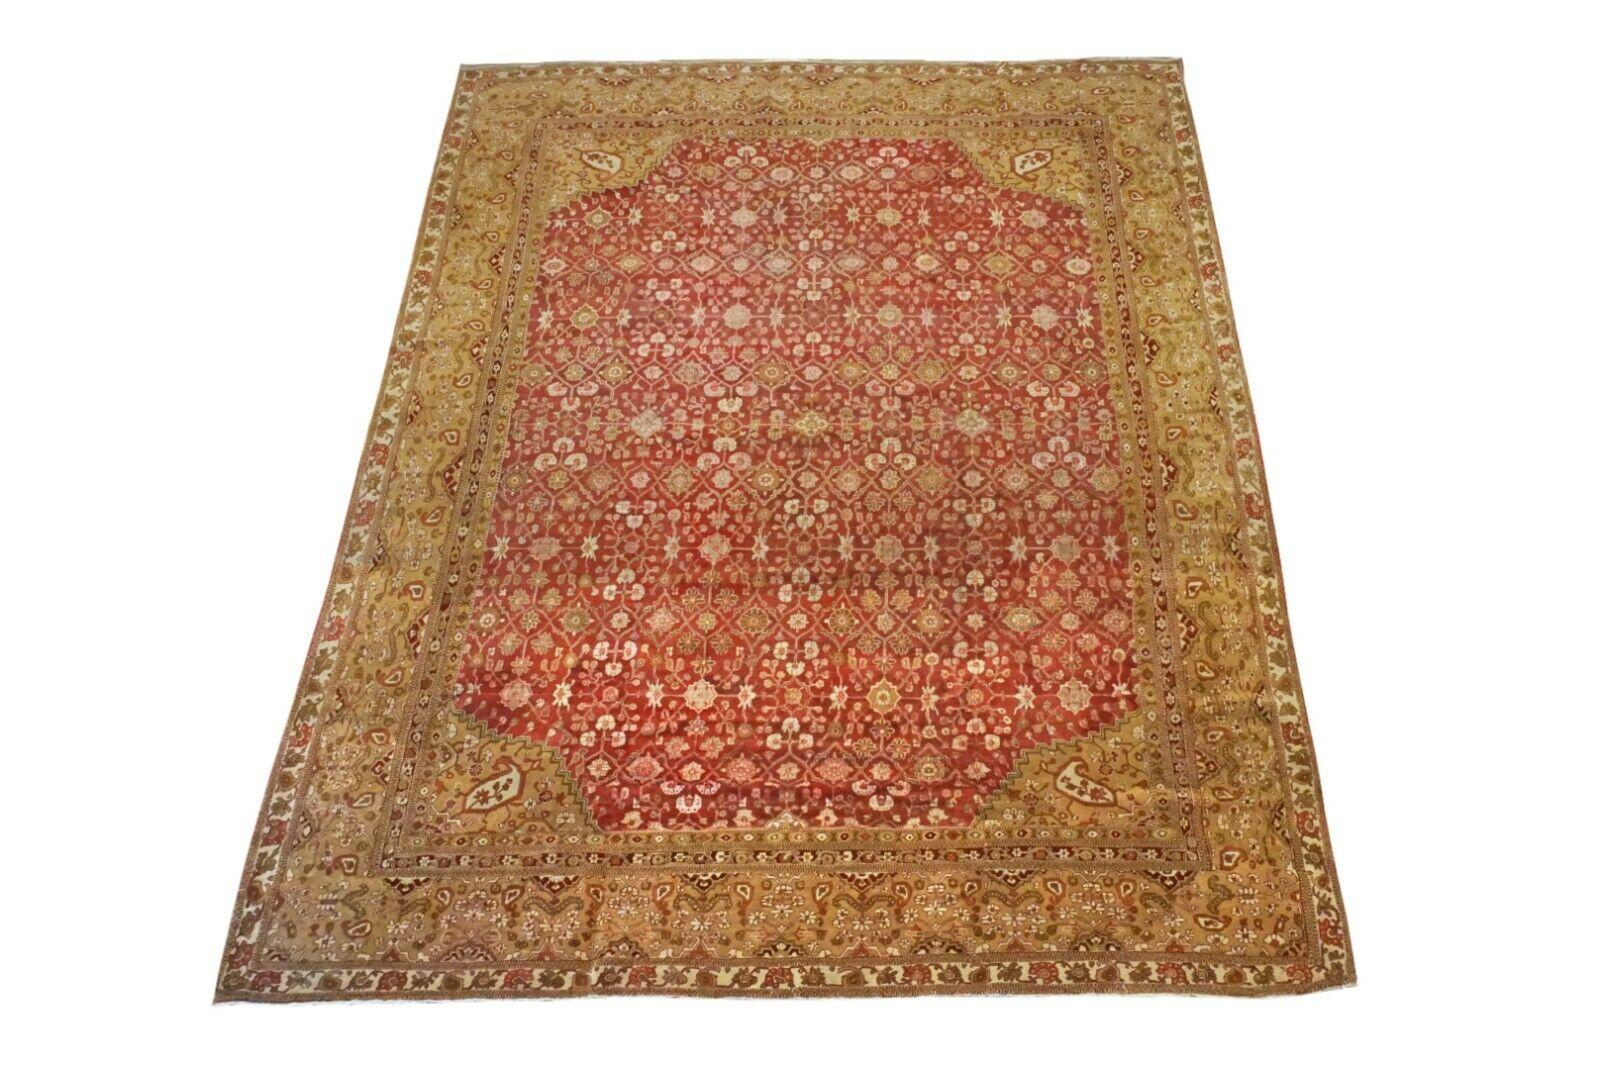 Hand-Knotted wool pile on a cotton foundation.

Circa 1900

Dimensions: 12' x 14'

Excellent for its age

Origin: India

Field Color: Red

Border Color: Light-Brown

Accent Colors: Light-Green, Plum, Burgundy, Hunter-Green, Light-Brown, Dusty-Rose